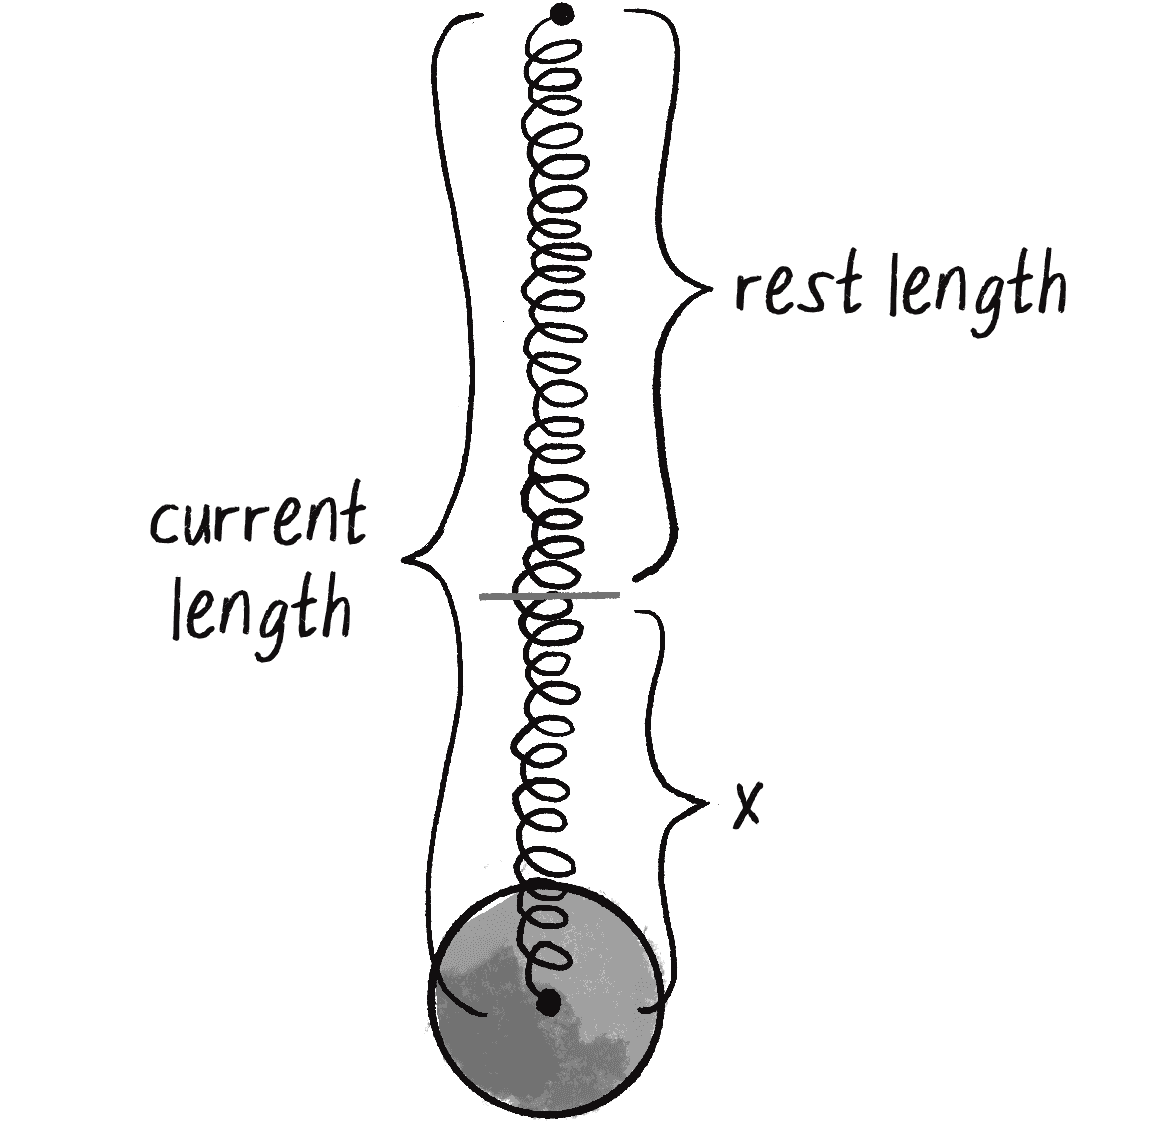 Figure 3.15: A spring’s extension (x) is the difference between its current length and its rest length.